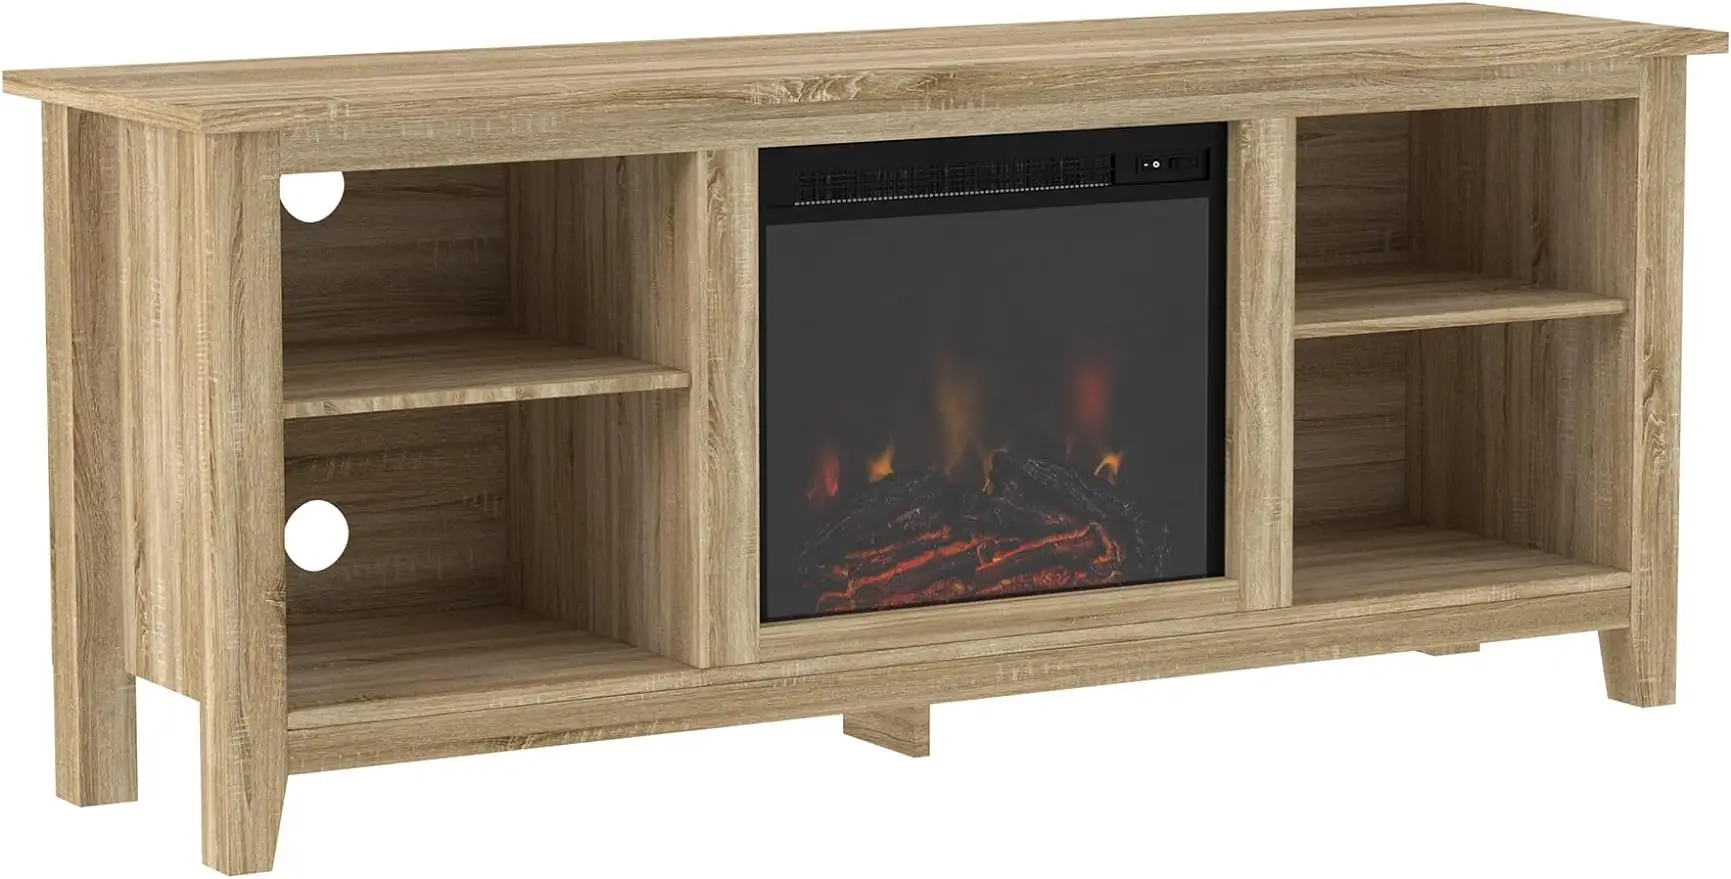 

Walker Edison Wren Classic 4 Cubby Fireplace TV Stand for TVs up to 65 Inches, 58 Inch, Driftwood